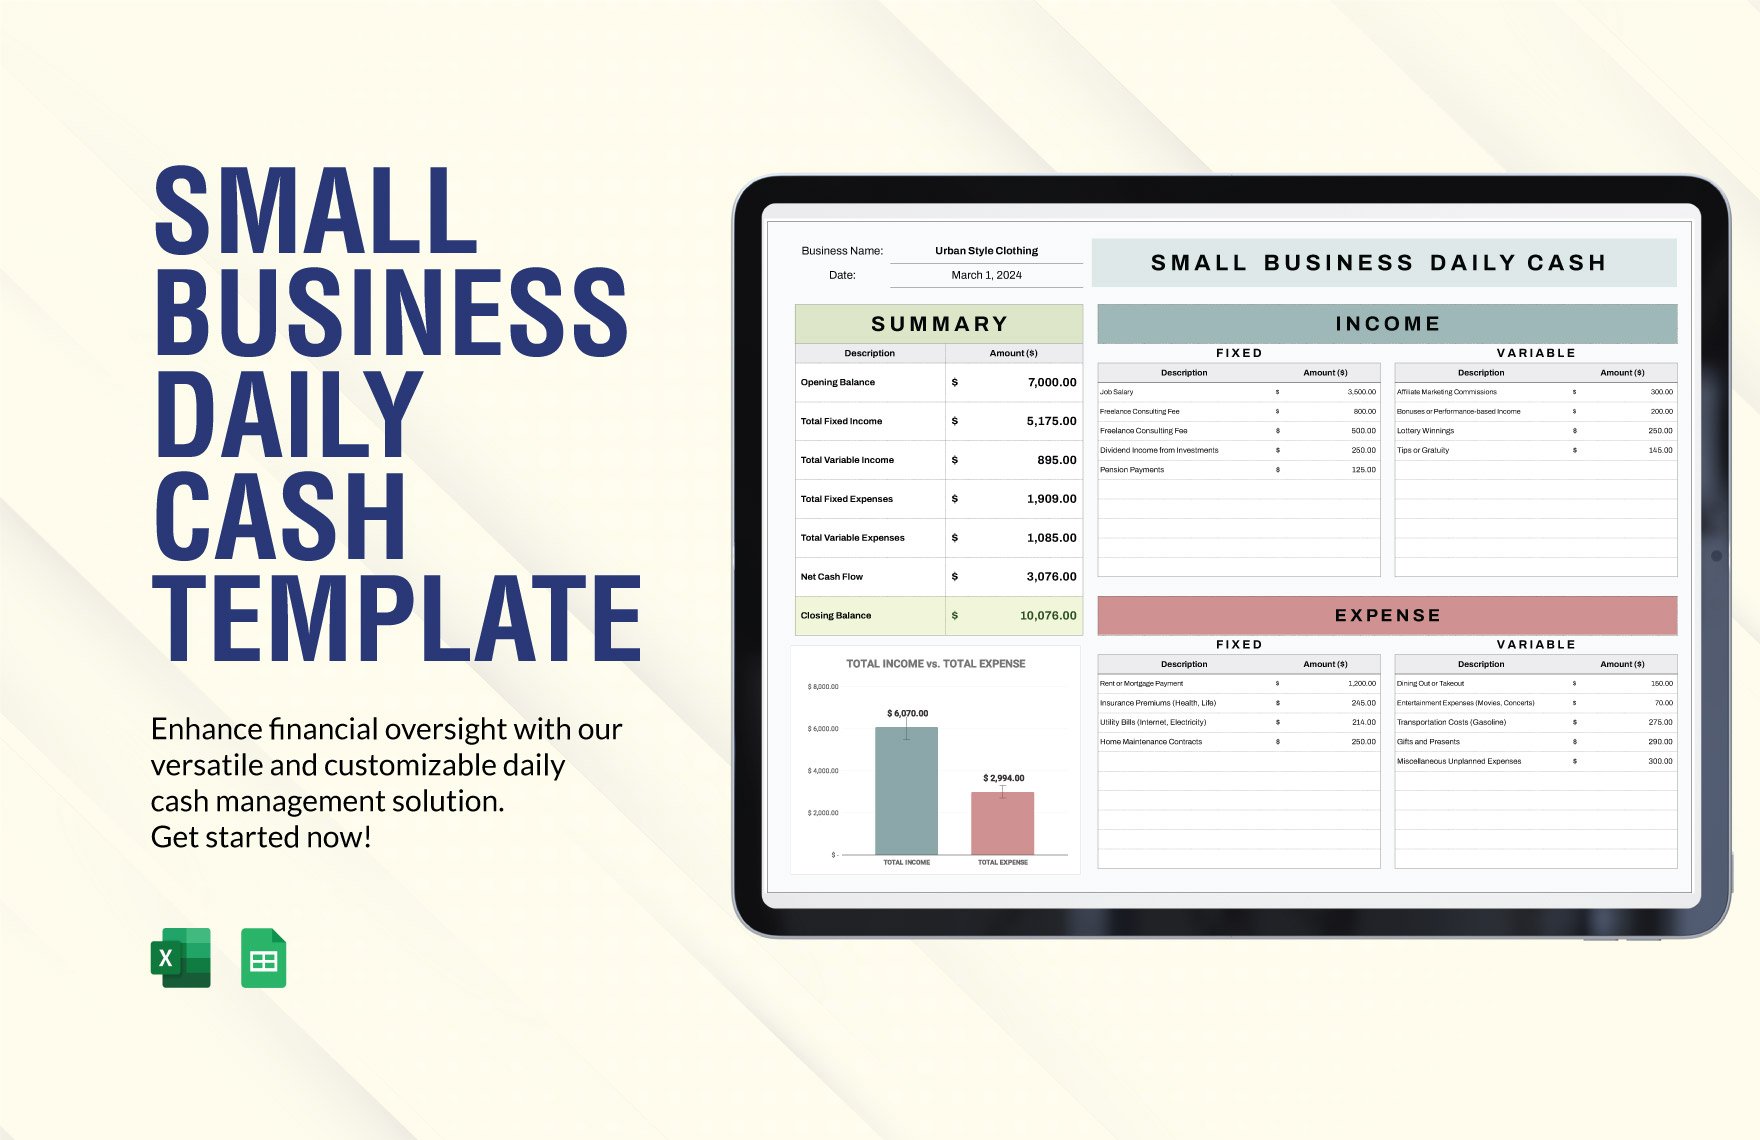 Small Business Daily Cash Template